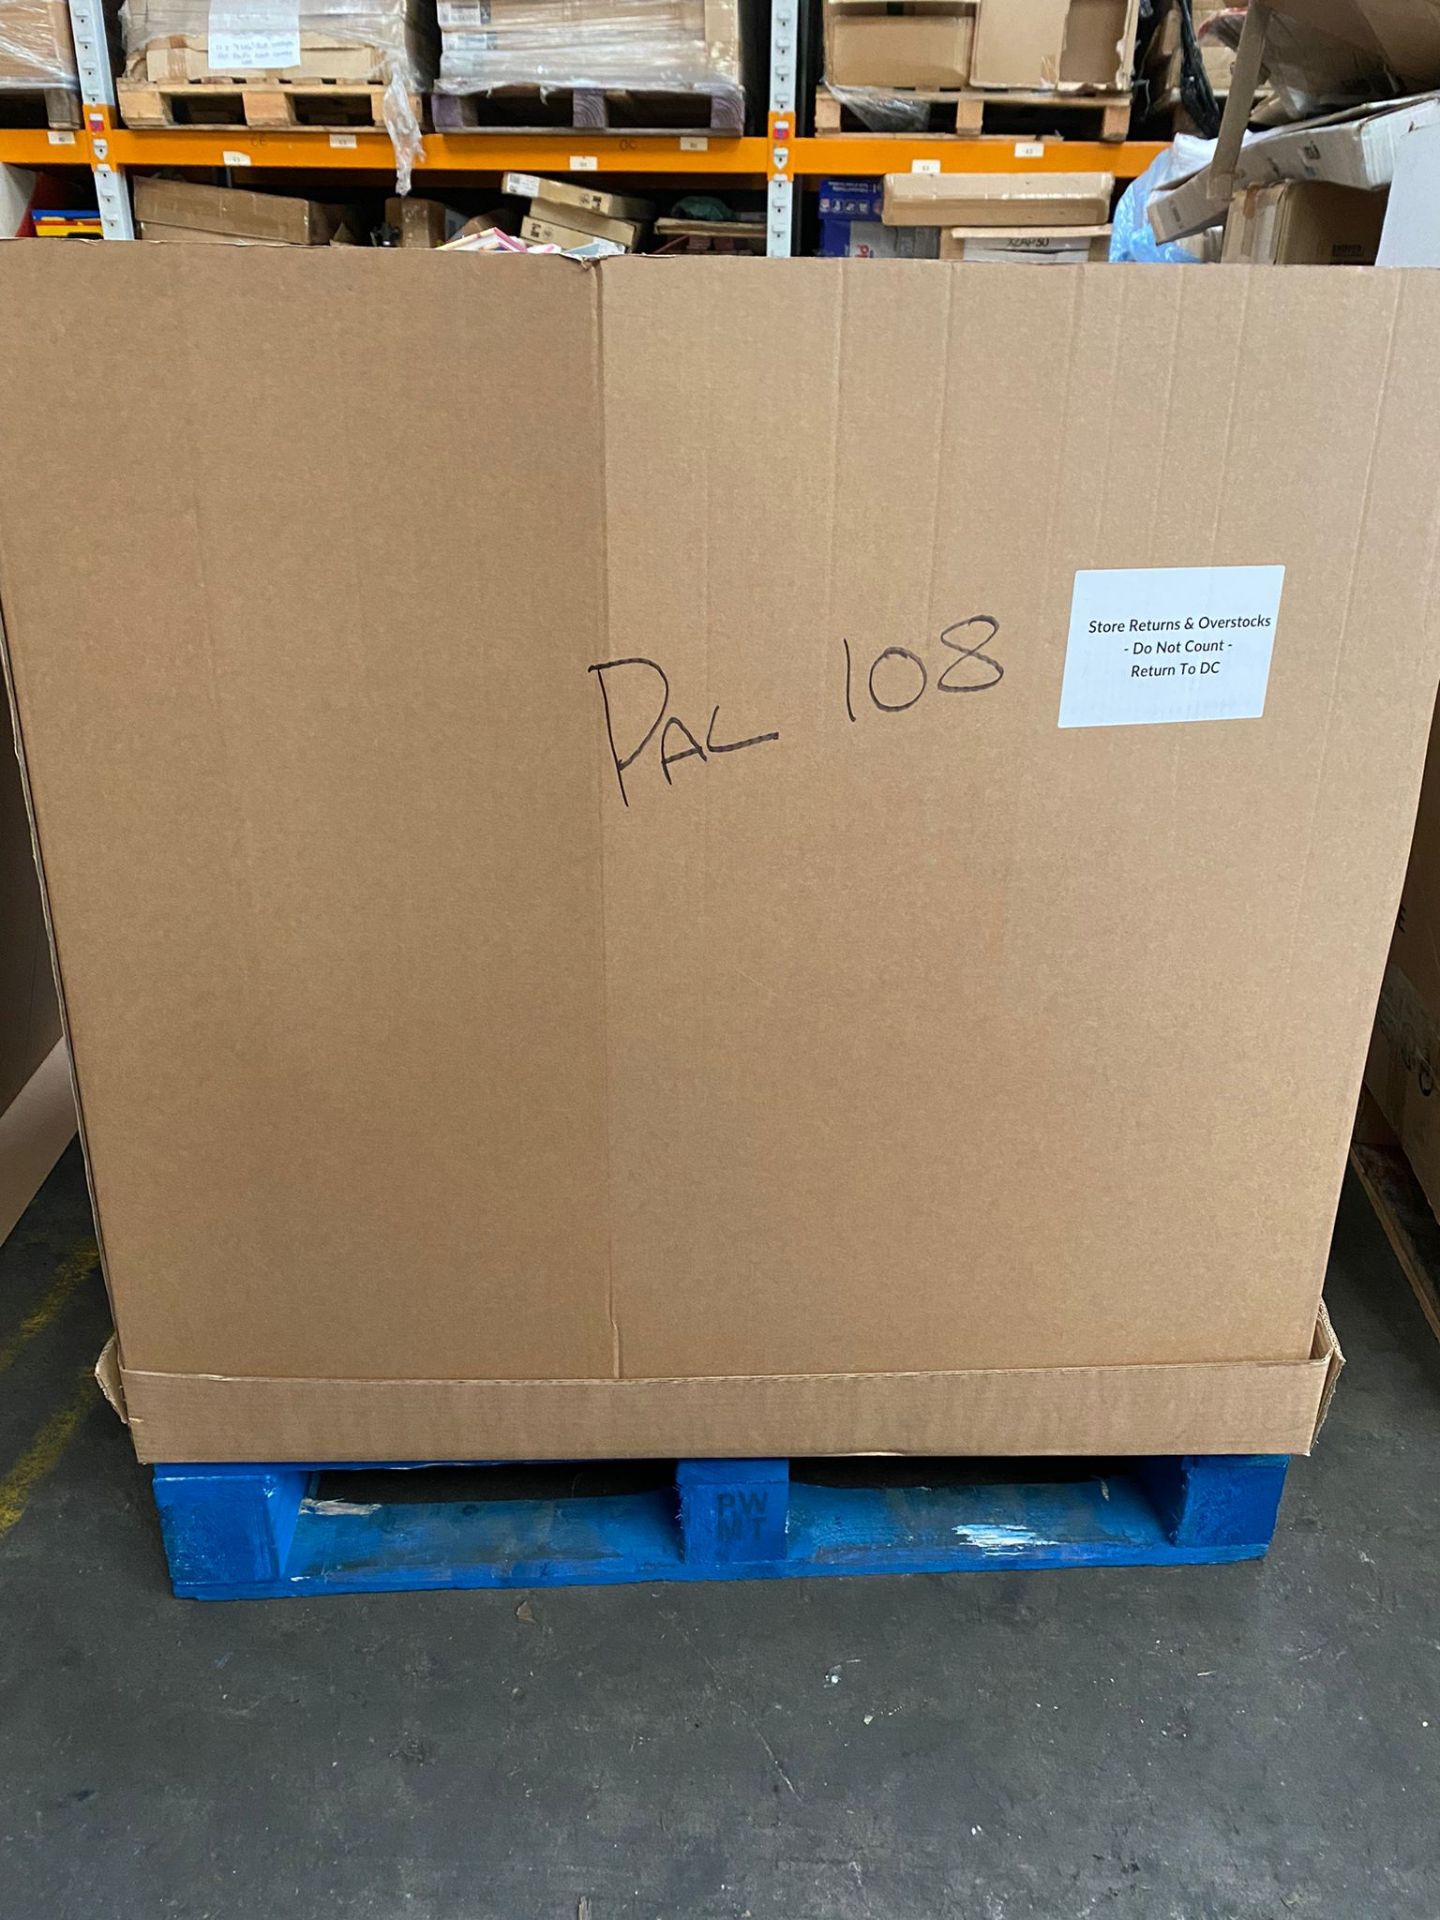 Wholesale Job Lot Pallet of New Mixed Lots Store Returns/Overstocks Stationary Toys etc. - Pal 108 - Image 6 of 6